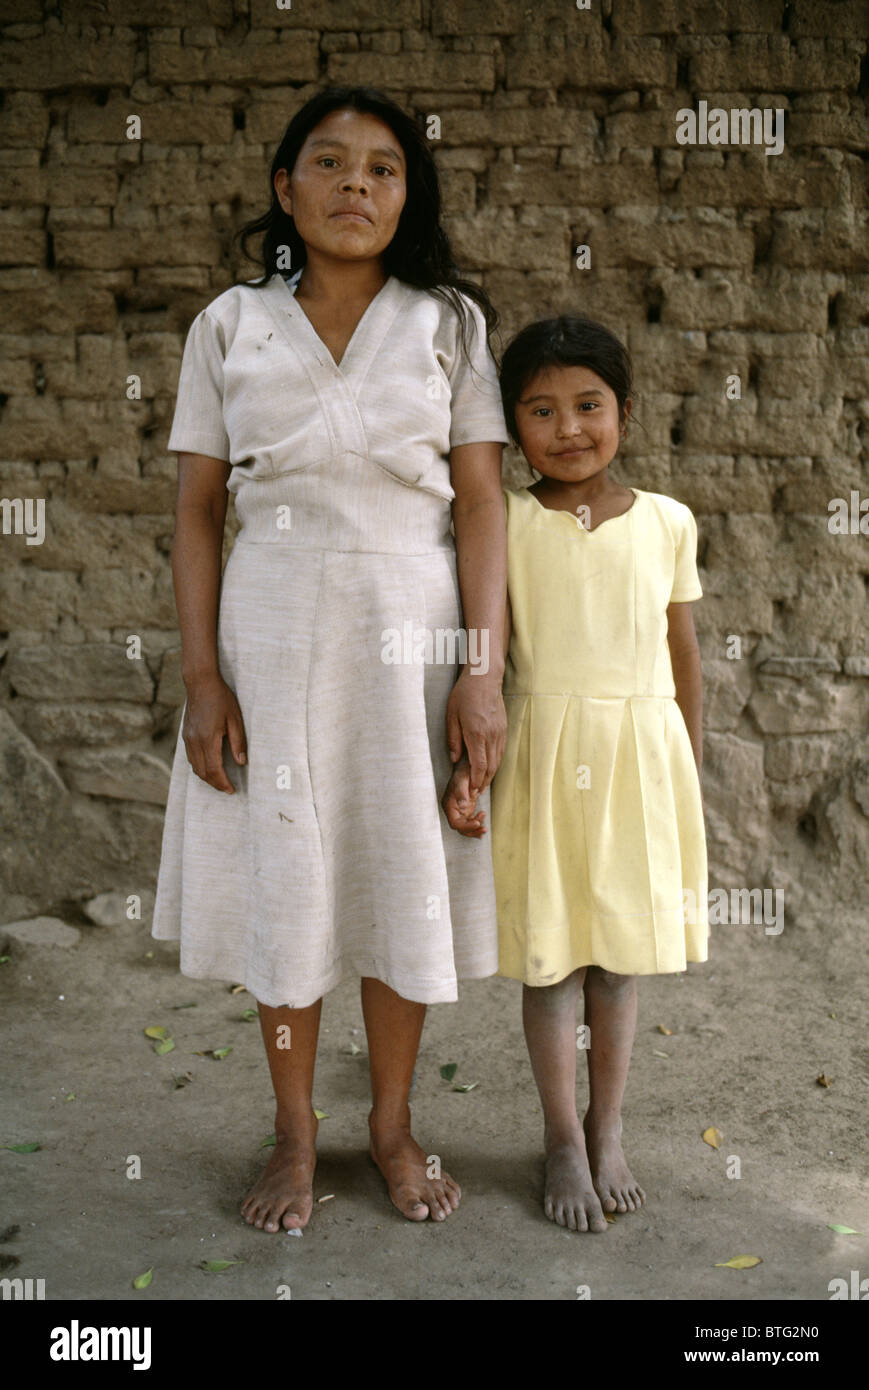 Mexico, Oaxaca, Macuilxochitl, Zapotec Mother and Daughter Stock Photo